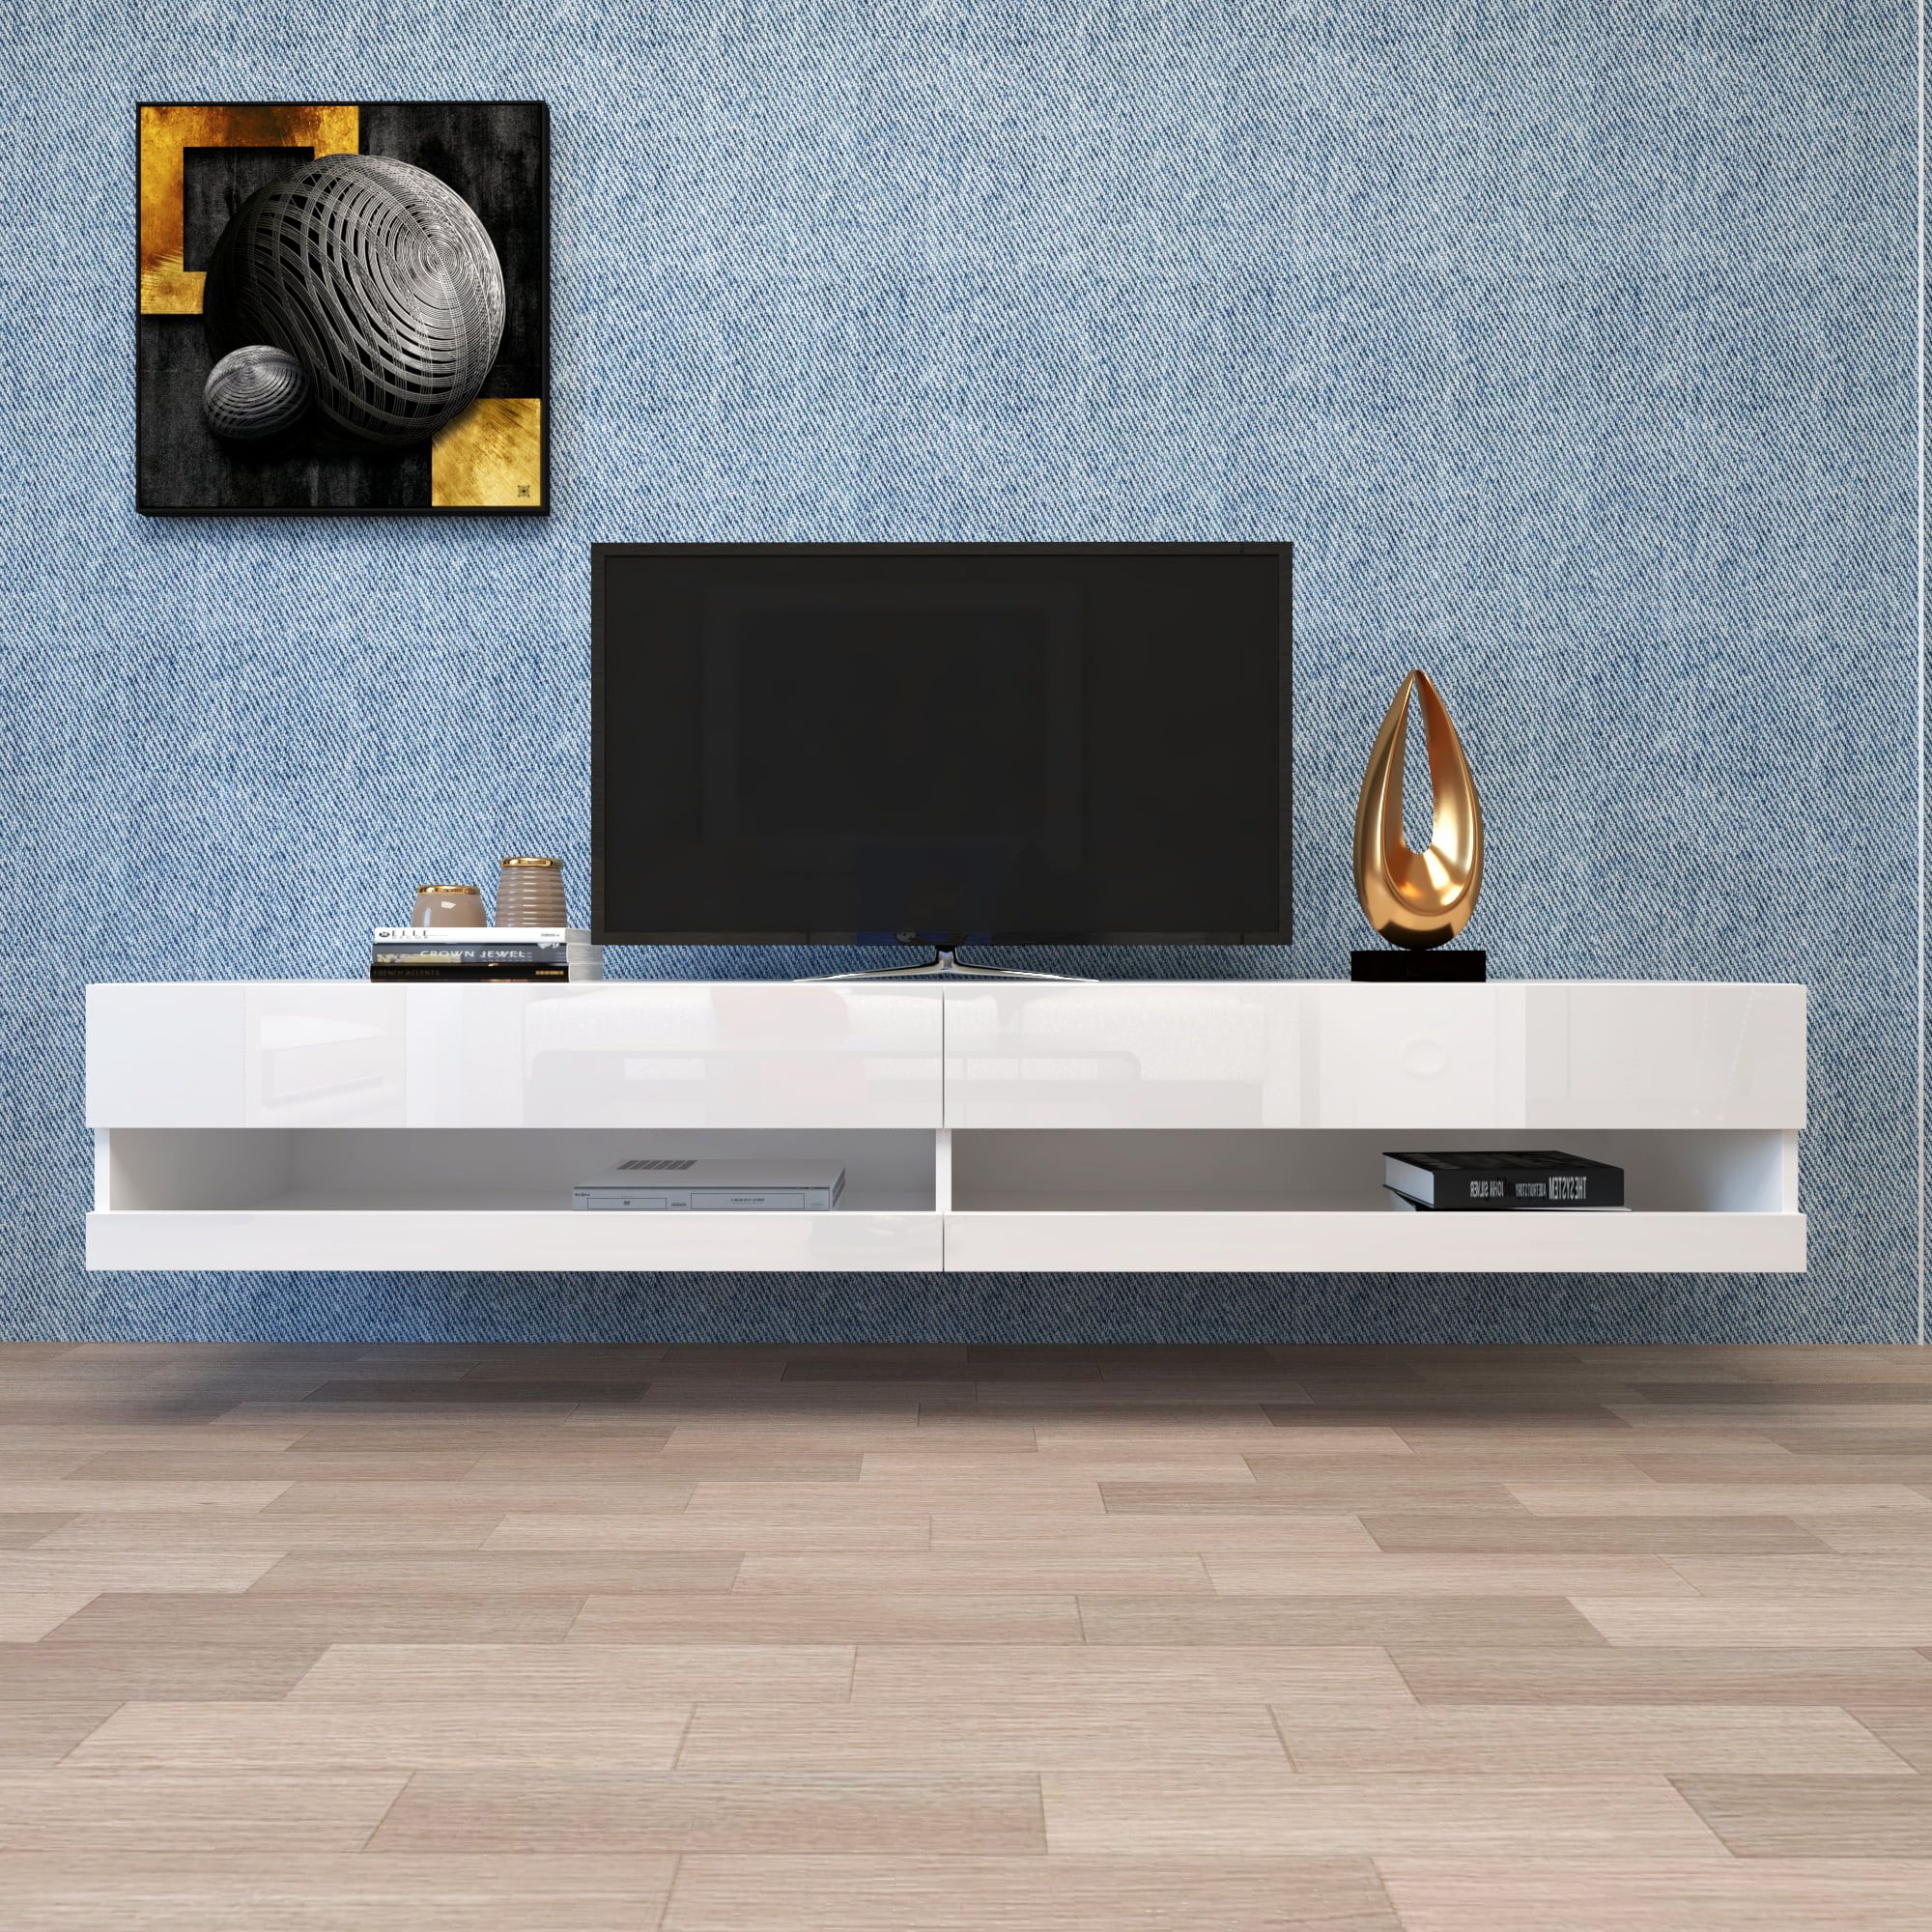 White Wall Mounted Tv Stand, Segmart Led Tv Cabinet For 80 Inch Tv In Wall Mounted Floating Tv Stands (Gallery 14 of 20)